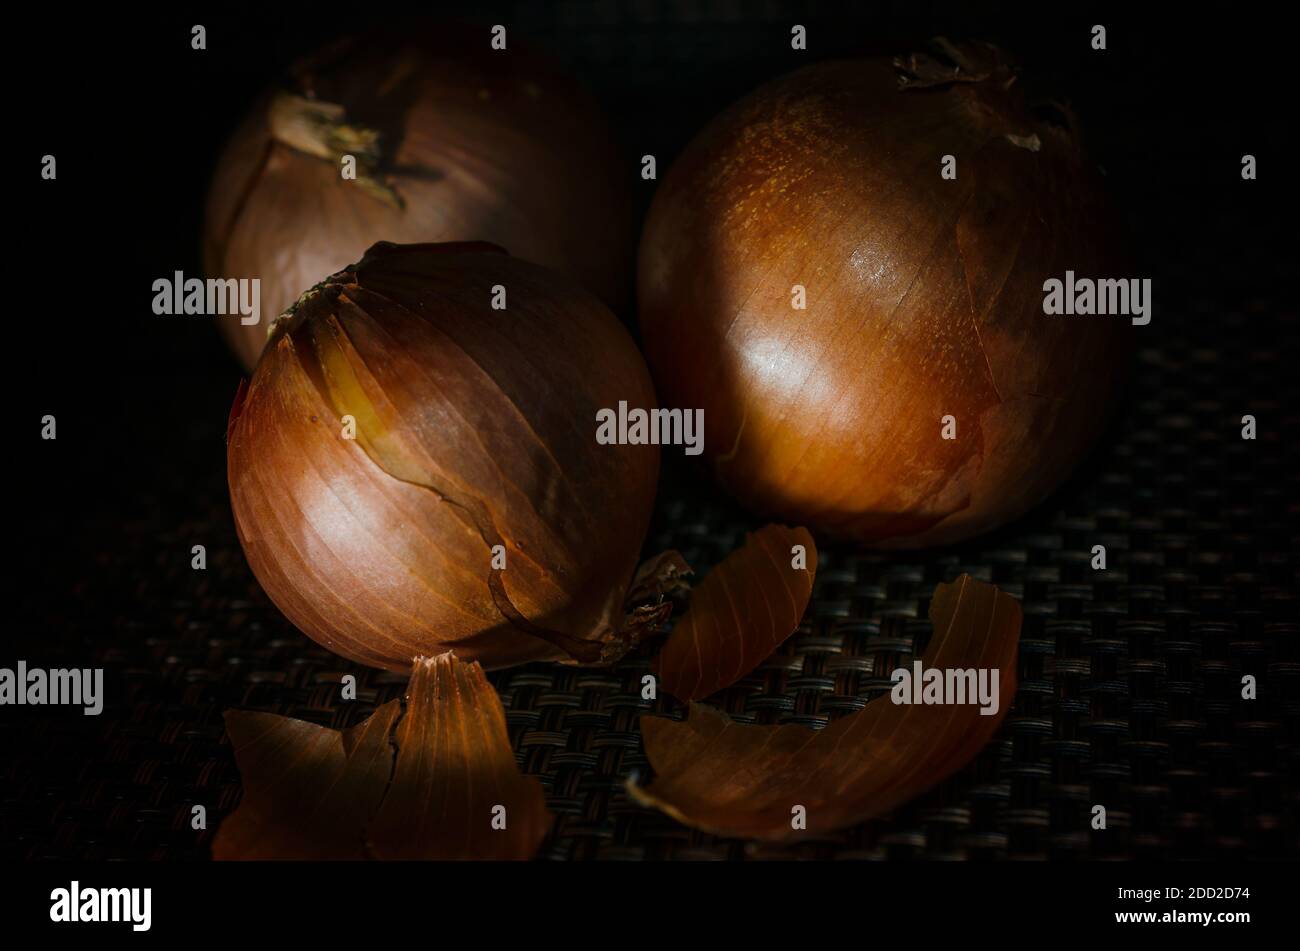 Three yellow onions are pictured unpeeled. Yellow onions are a variety of onion with a whitish, yellow inside and yellow, brown or reddish skin. Stock Photo